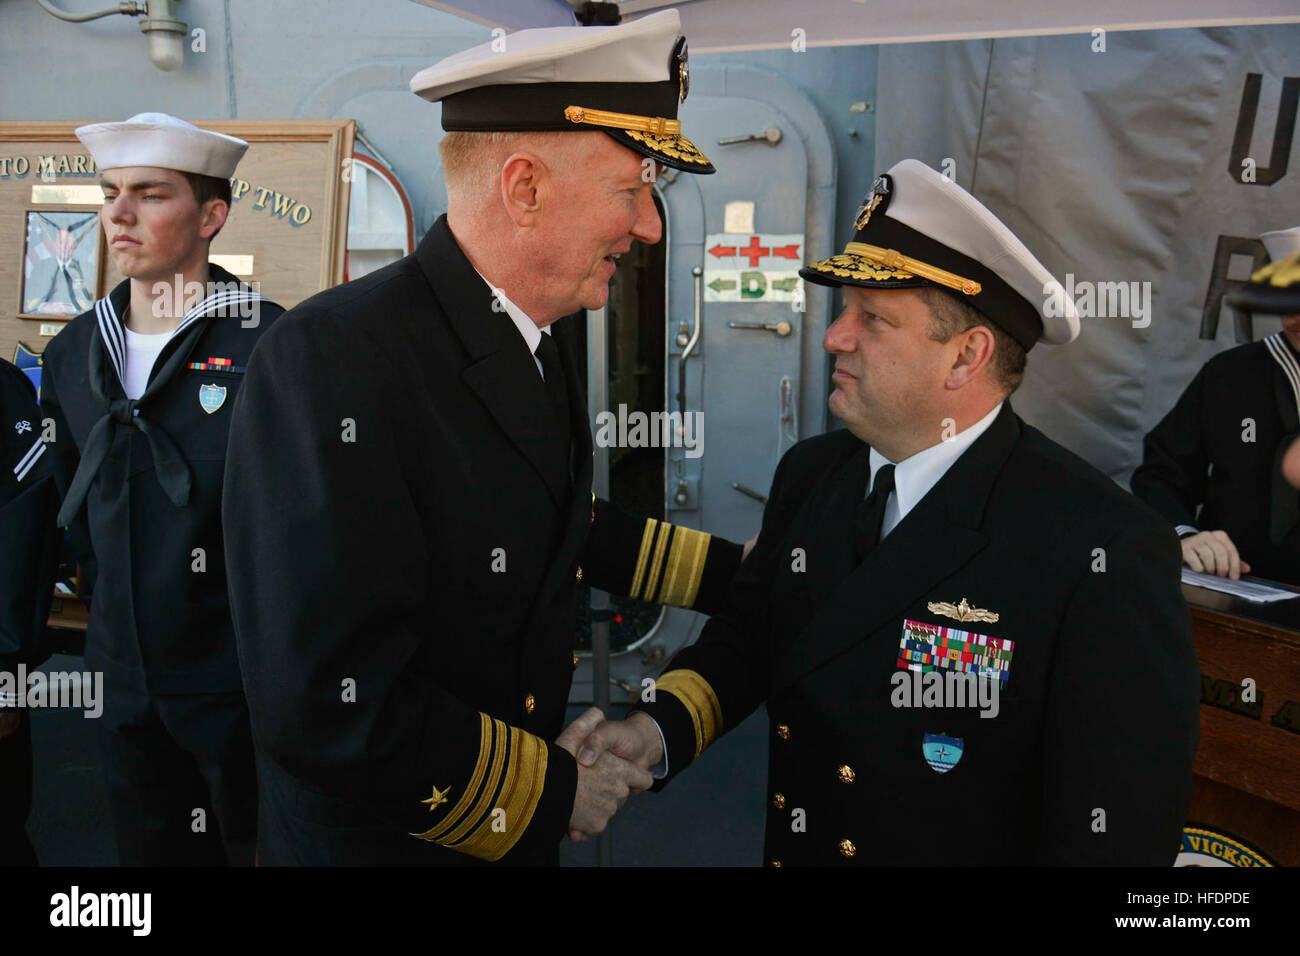 150605-N-IY633-208 GDYNIA, Poland (June 5, 2015) – Commander, Standing NATO Maritime Group 2 (SNMG2), Rear Adm. Brad Williamson, right; welcomes Commander, Naval Striking and Support Forces NATO, Vice Adm. James Foggo aboard SNMG2 flagship USS Vicksburg (CG 69) for a reception during SNMG2’s port visit to the city in preparation for exercise Baltic Operations (BALTOPS). BALTOPS is an annually reoccurring multinational exercise designed to enhance flexibility and interoperability, as well as demonstrate resolve of Allied and partner forces to defend the Baltic region. (U.S. Navy photo by Mass C Stock Photo